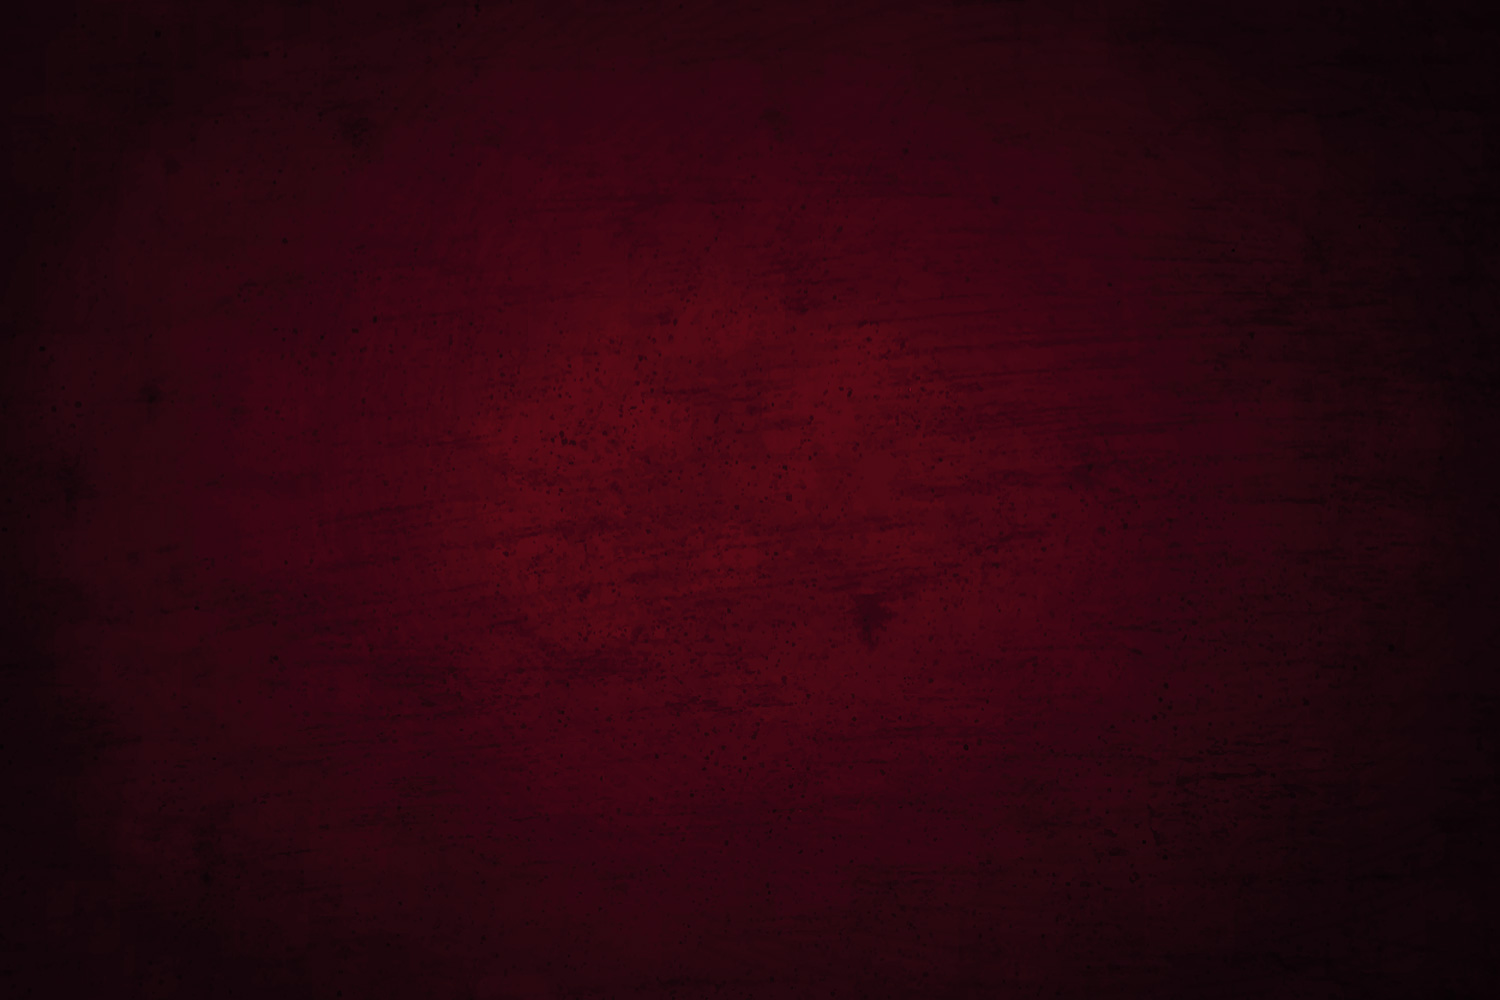 Blank empty very dark red or maroon coloured grungy or grunge textured vector wrinkled crinkled horizontal backgrounds like Christmas paper